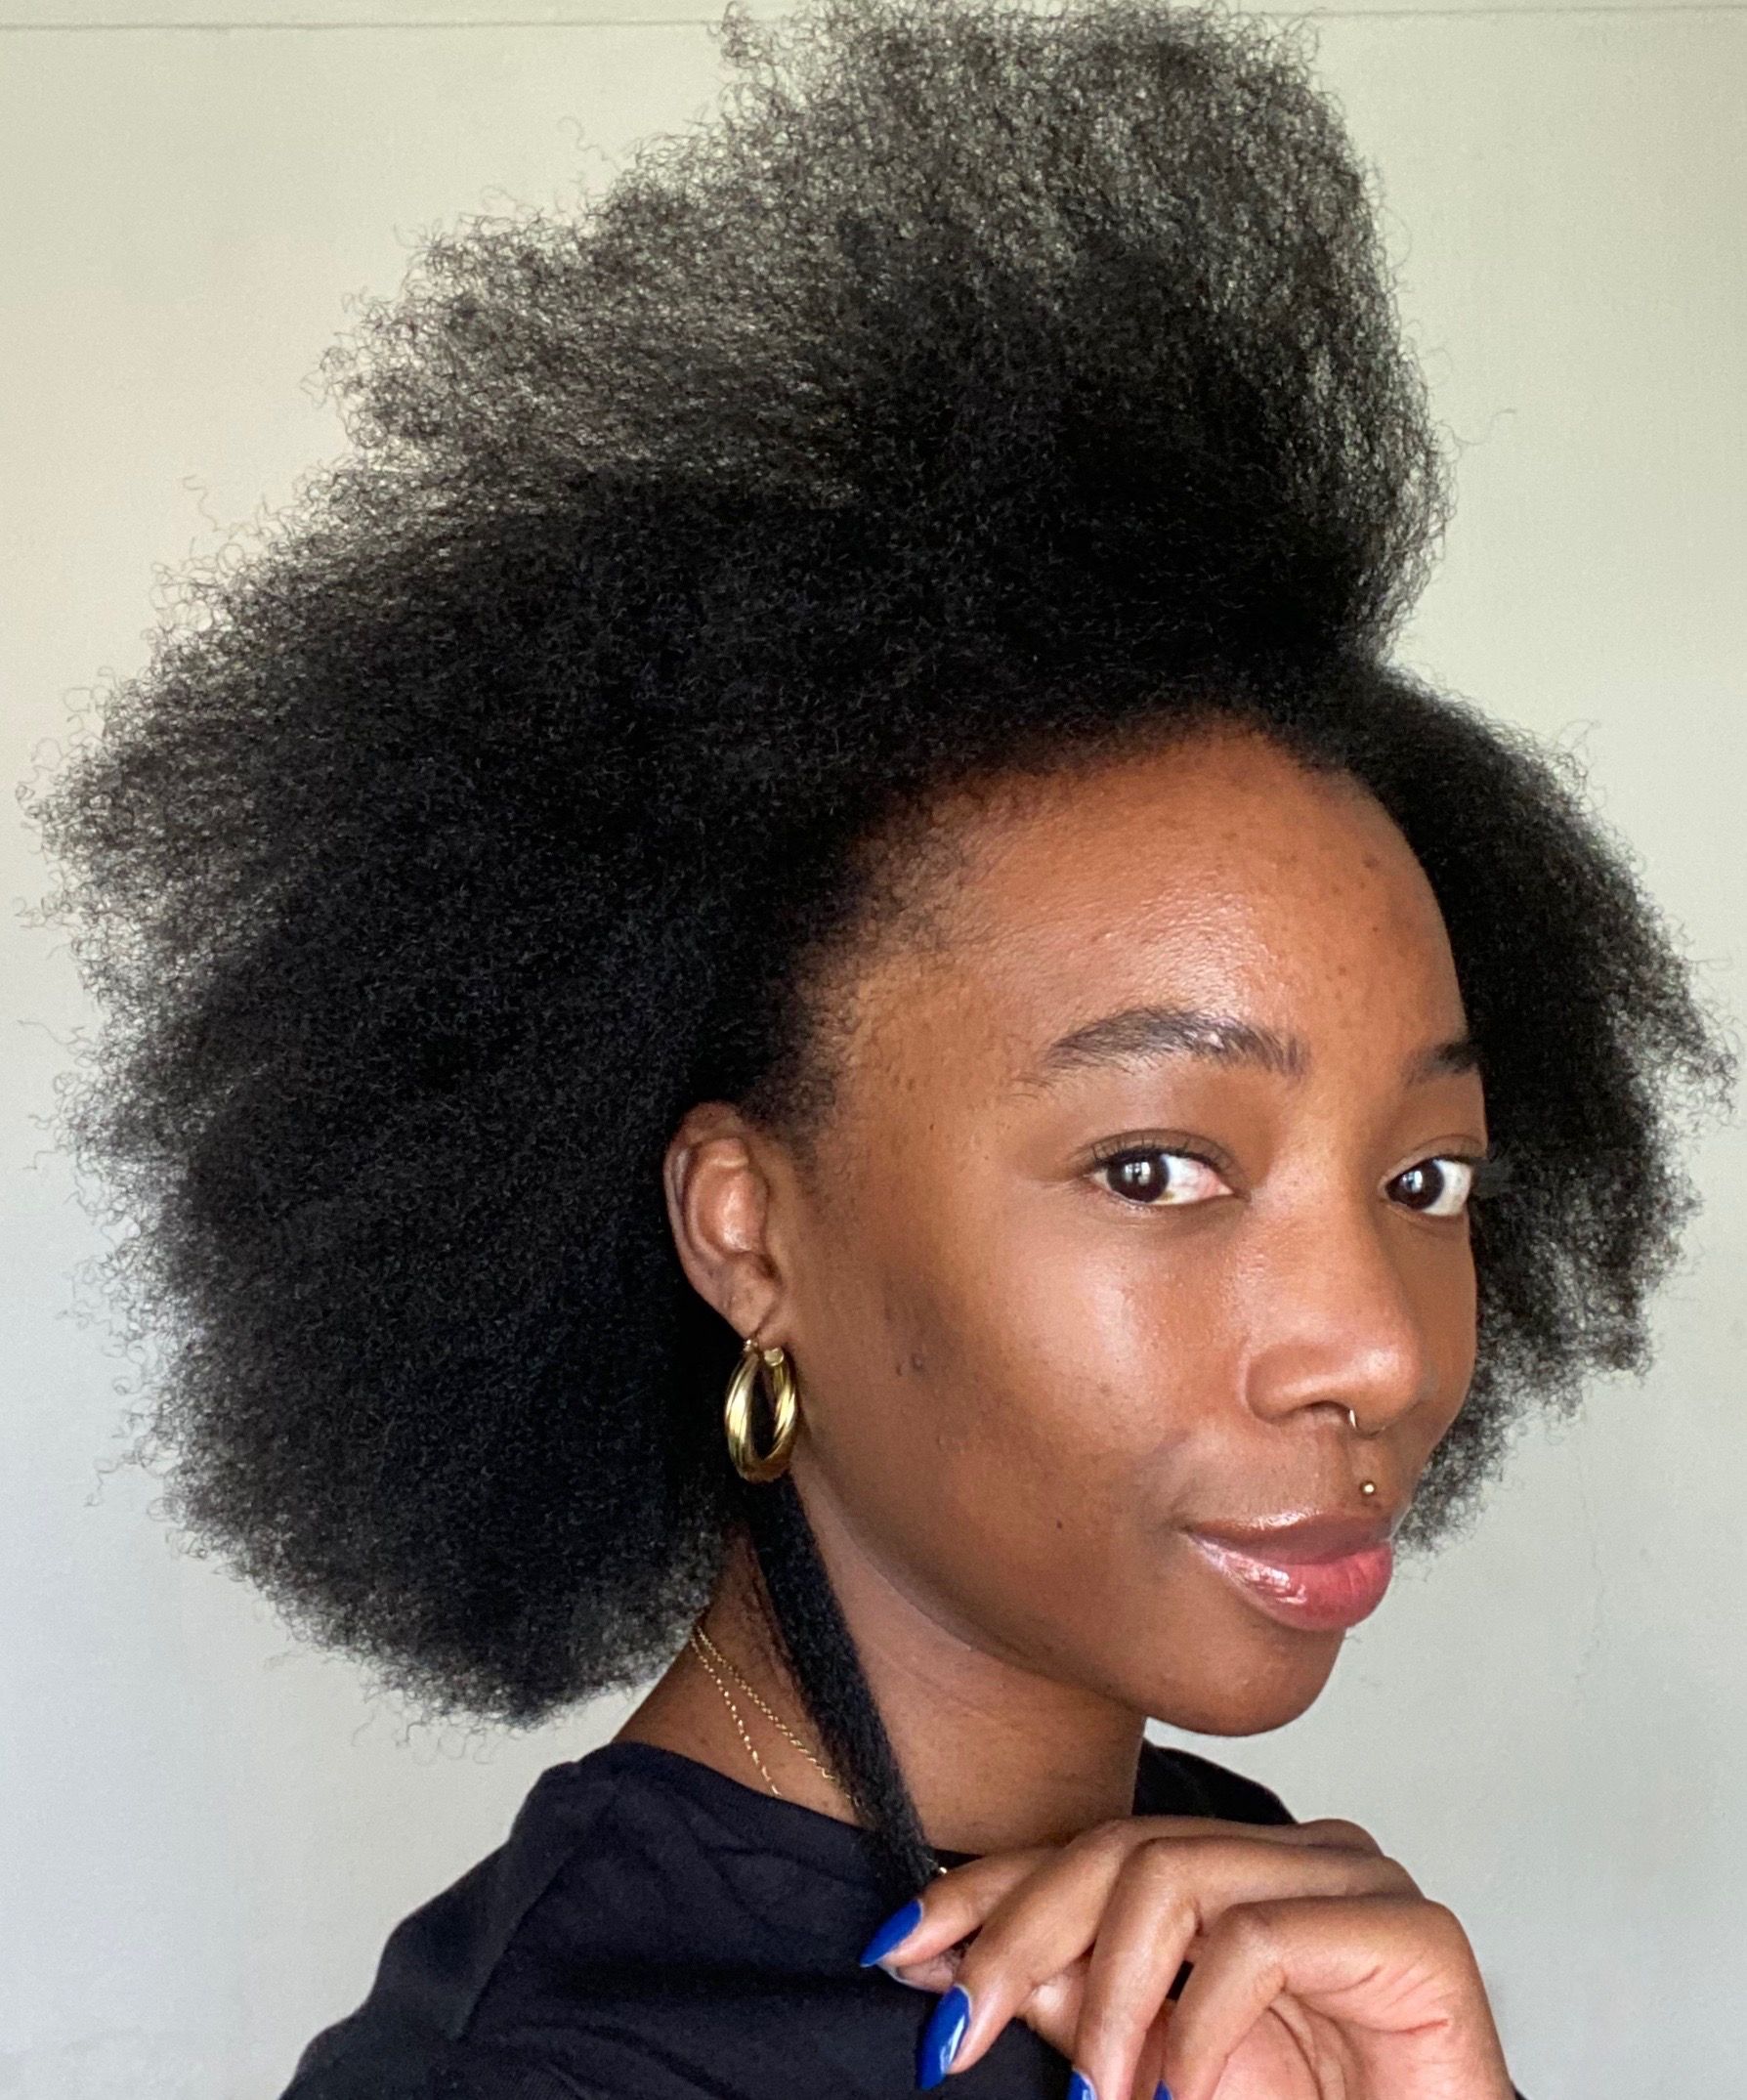 Revlon One-Step Hair Dryer on natural hair: Does it actually work